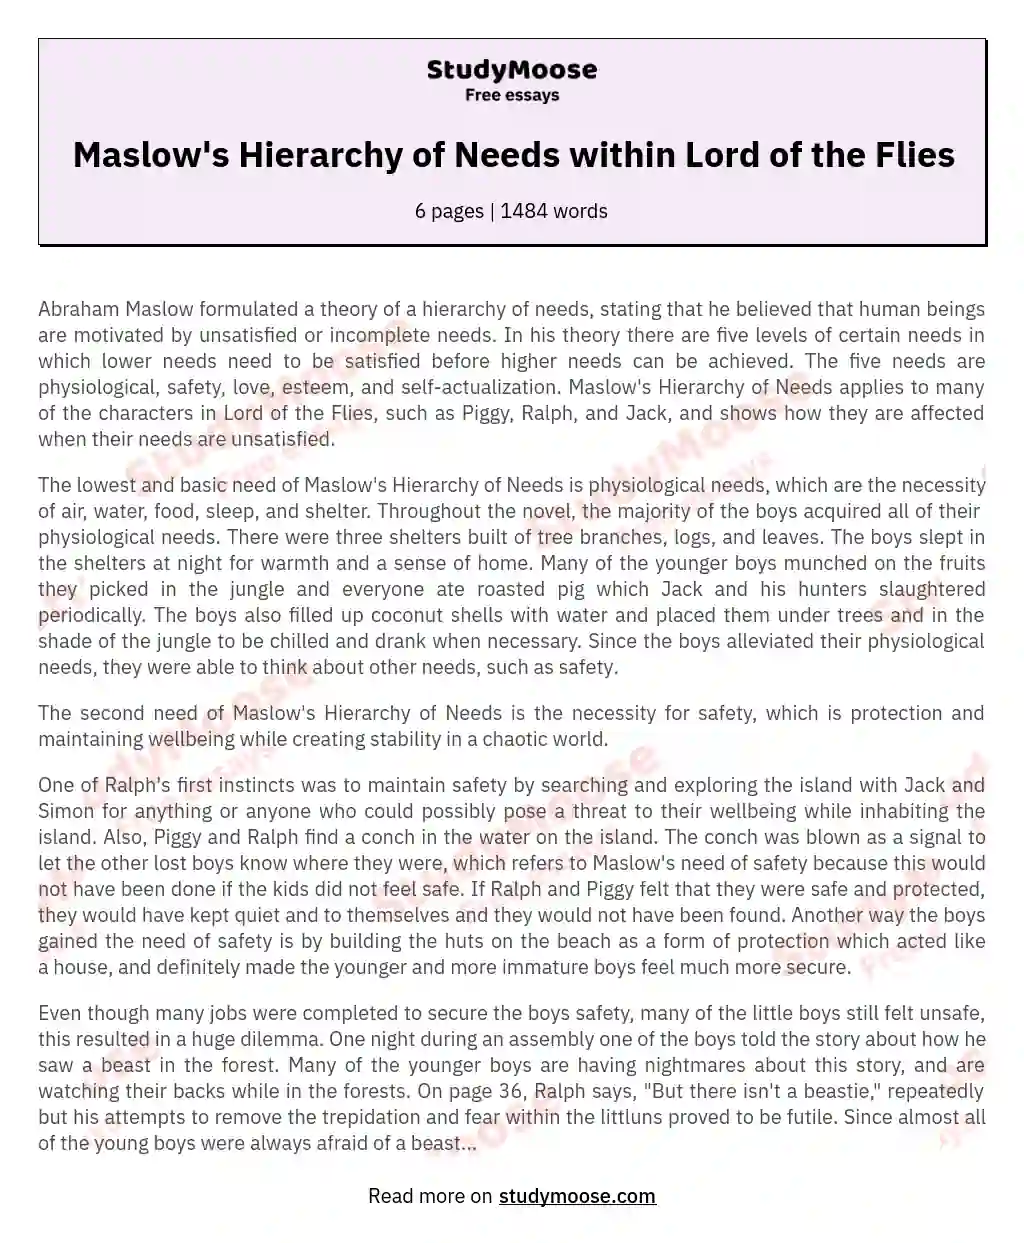 Maslow's Hierarchy of Needs within Lord of the Flies essay